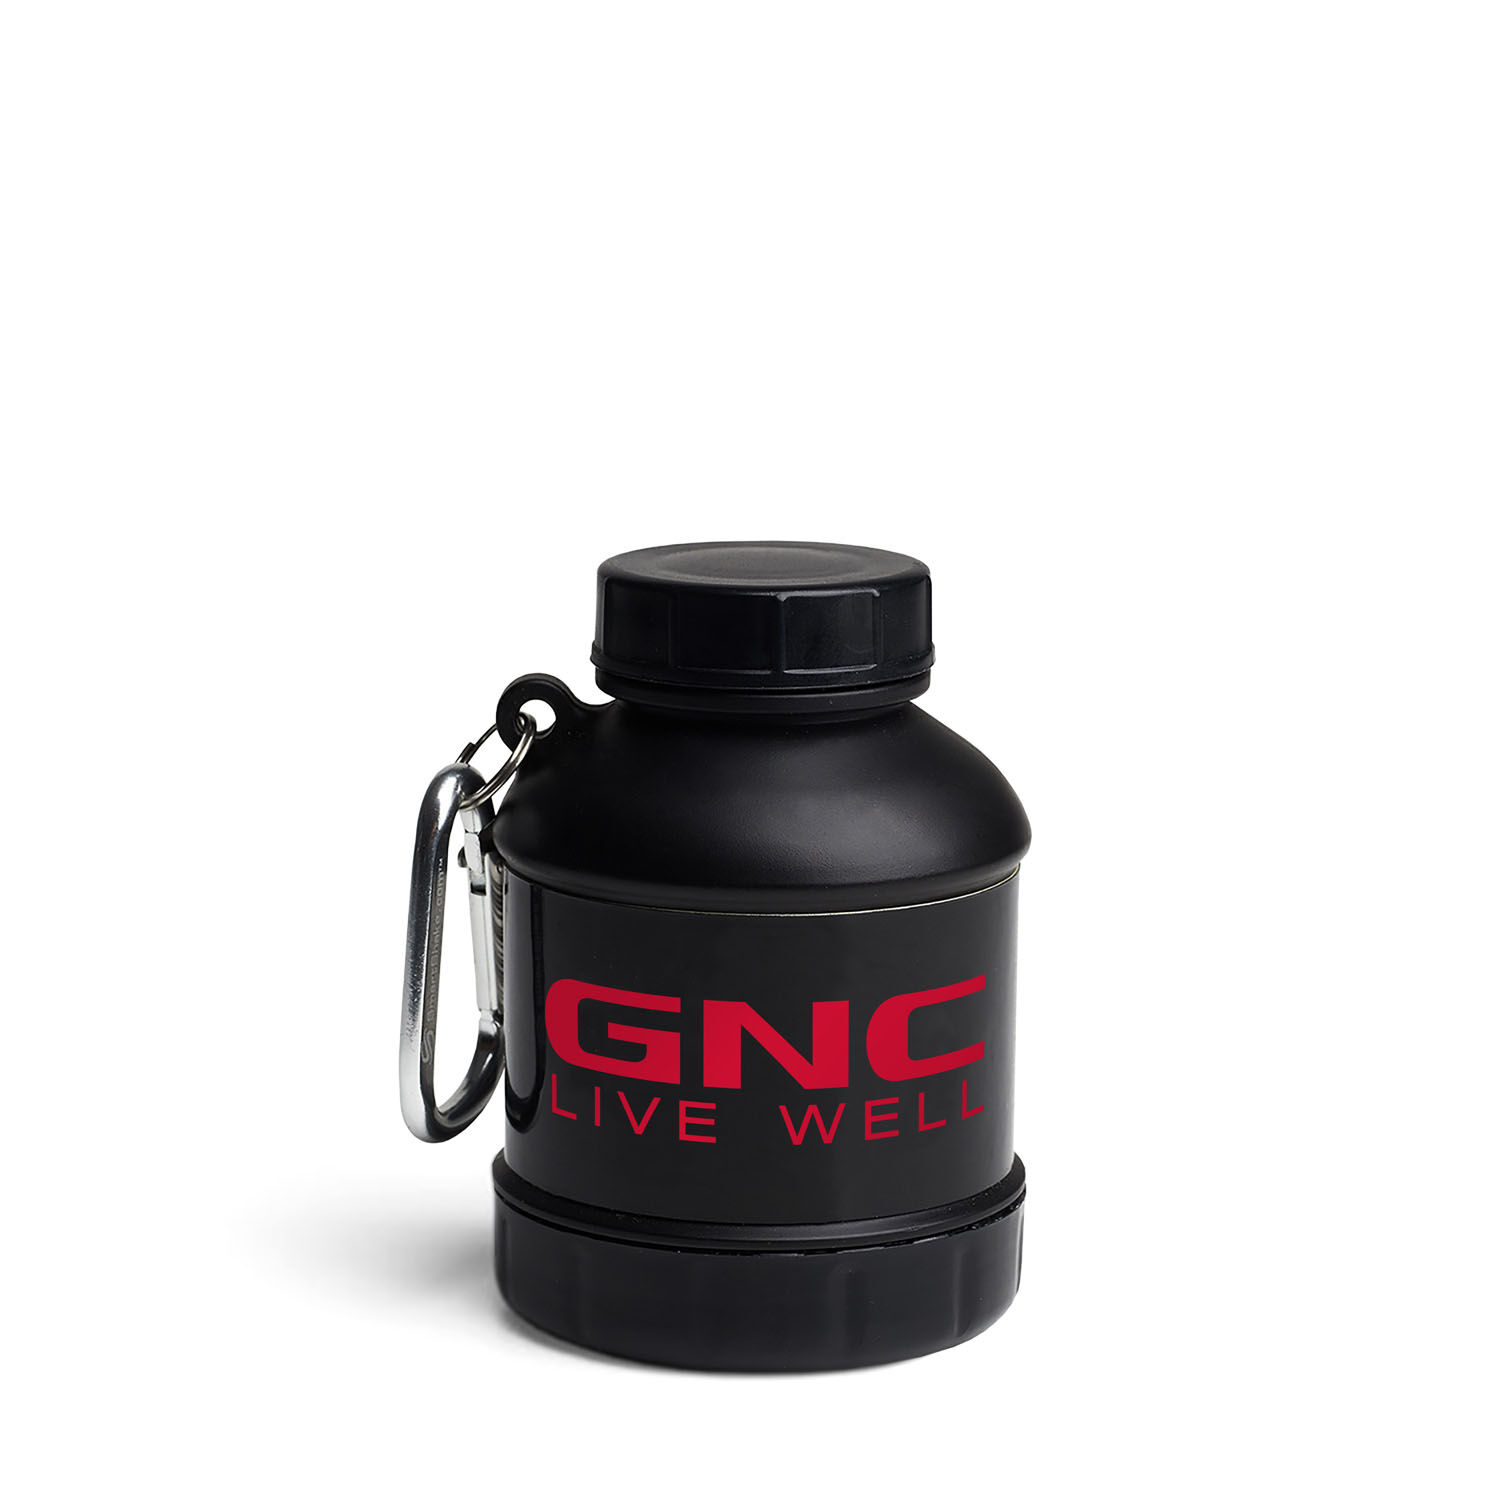 Promotional 2 in 1 Protein Funnel with your logo